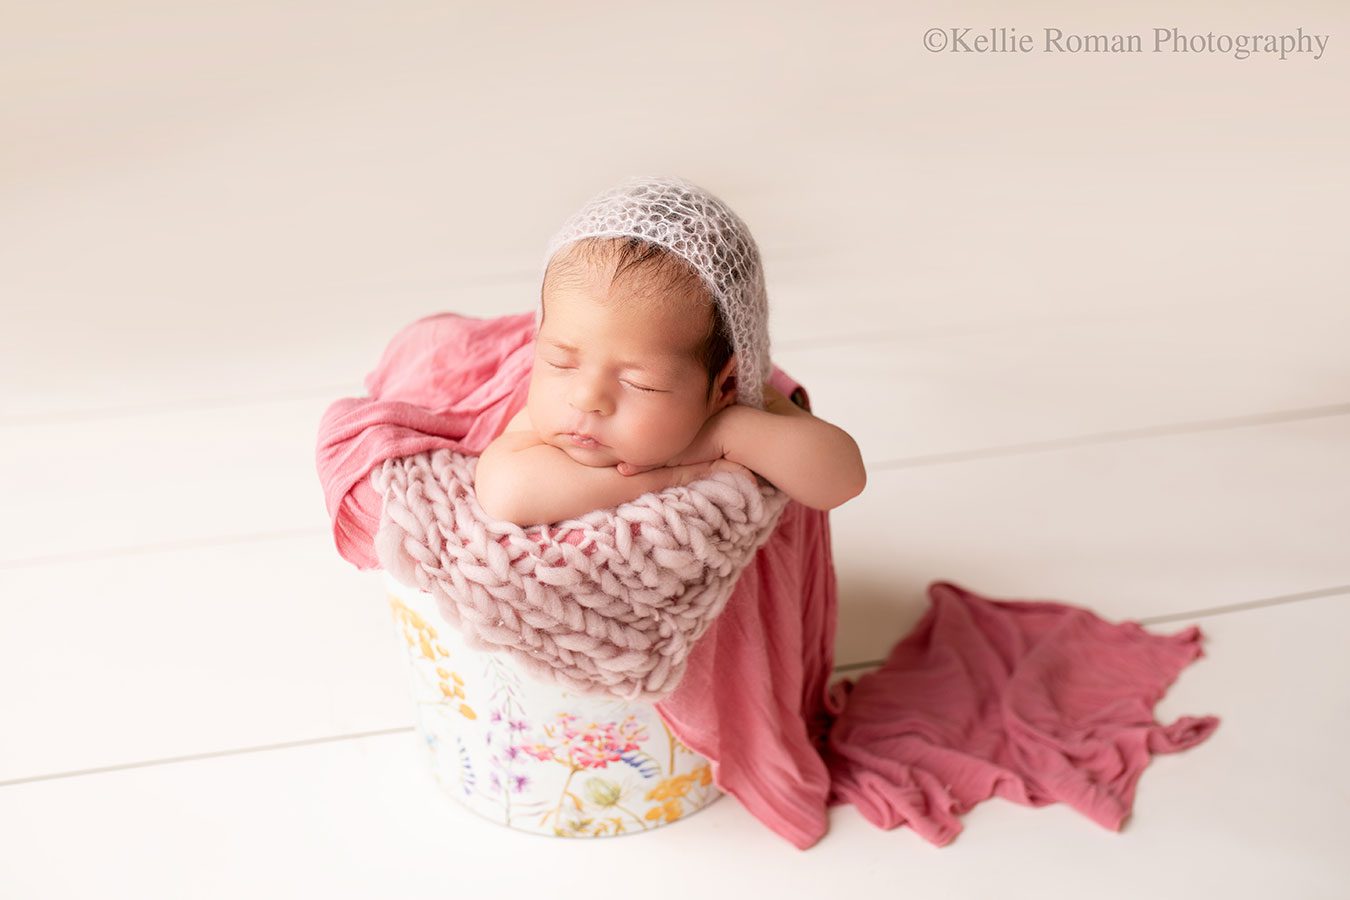 Newborn baby girl is in Milwaukee Photographer studio. baby girl is sleeping upright in a floral bucket. newborn has her arms under her chin. she has a light pink bonnet on and the bucket is stuffed with light pink and dark mauve fabrics.